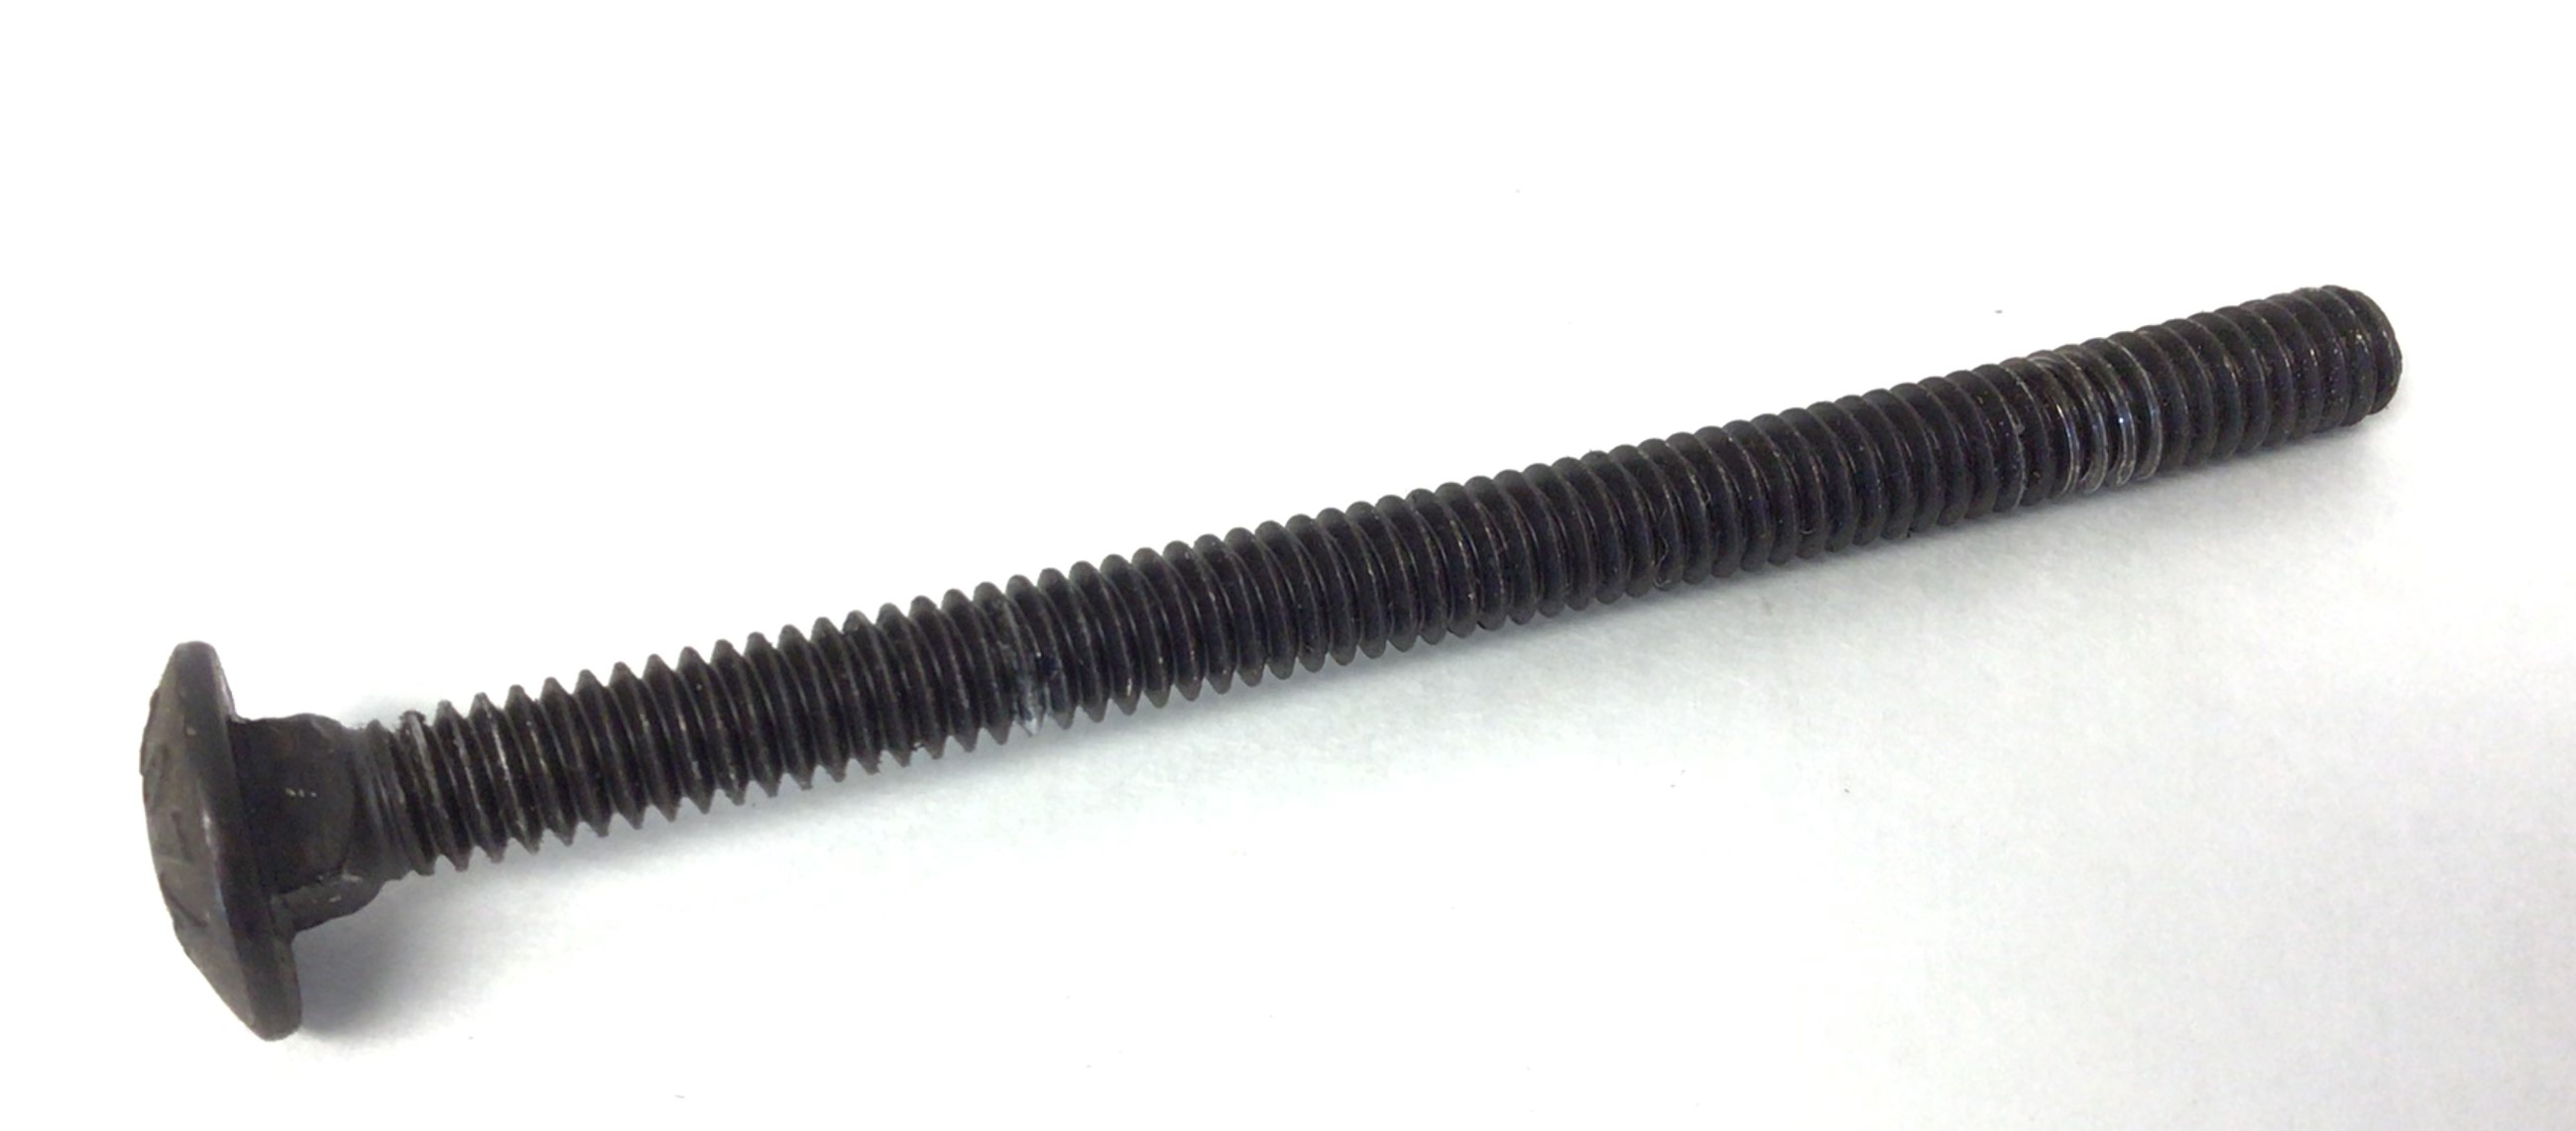 Upright Carriage  Bolt, 1/4